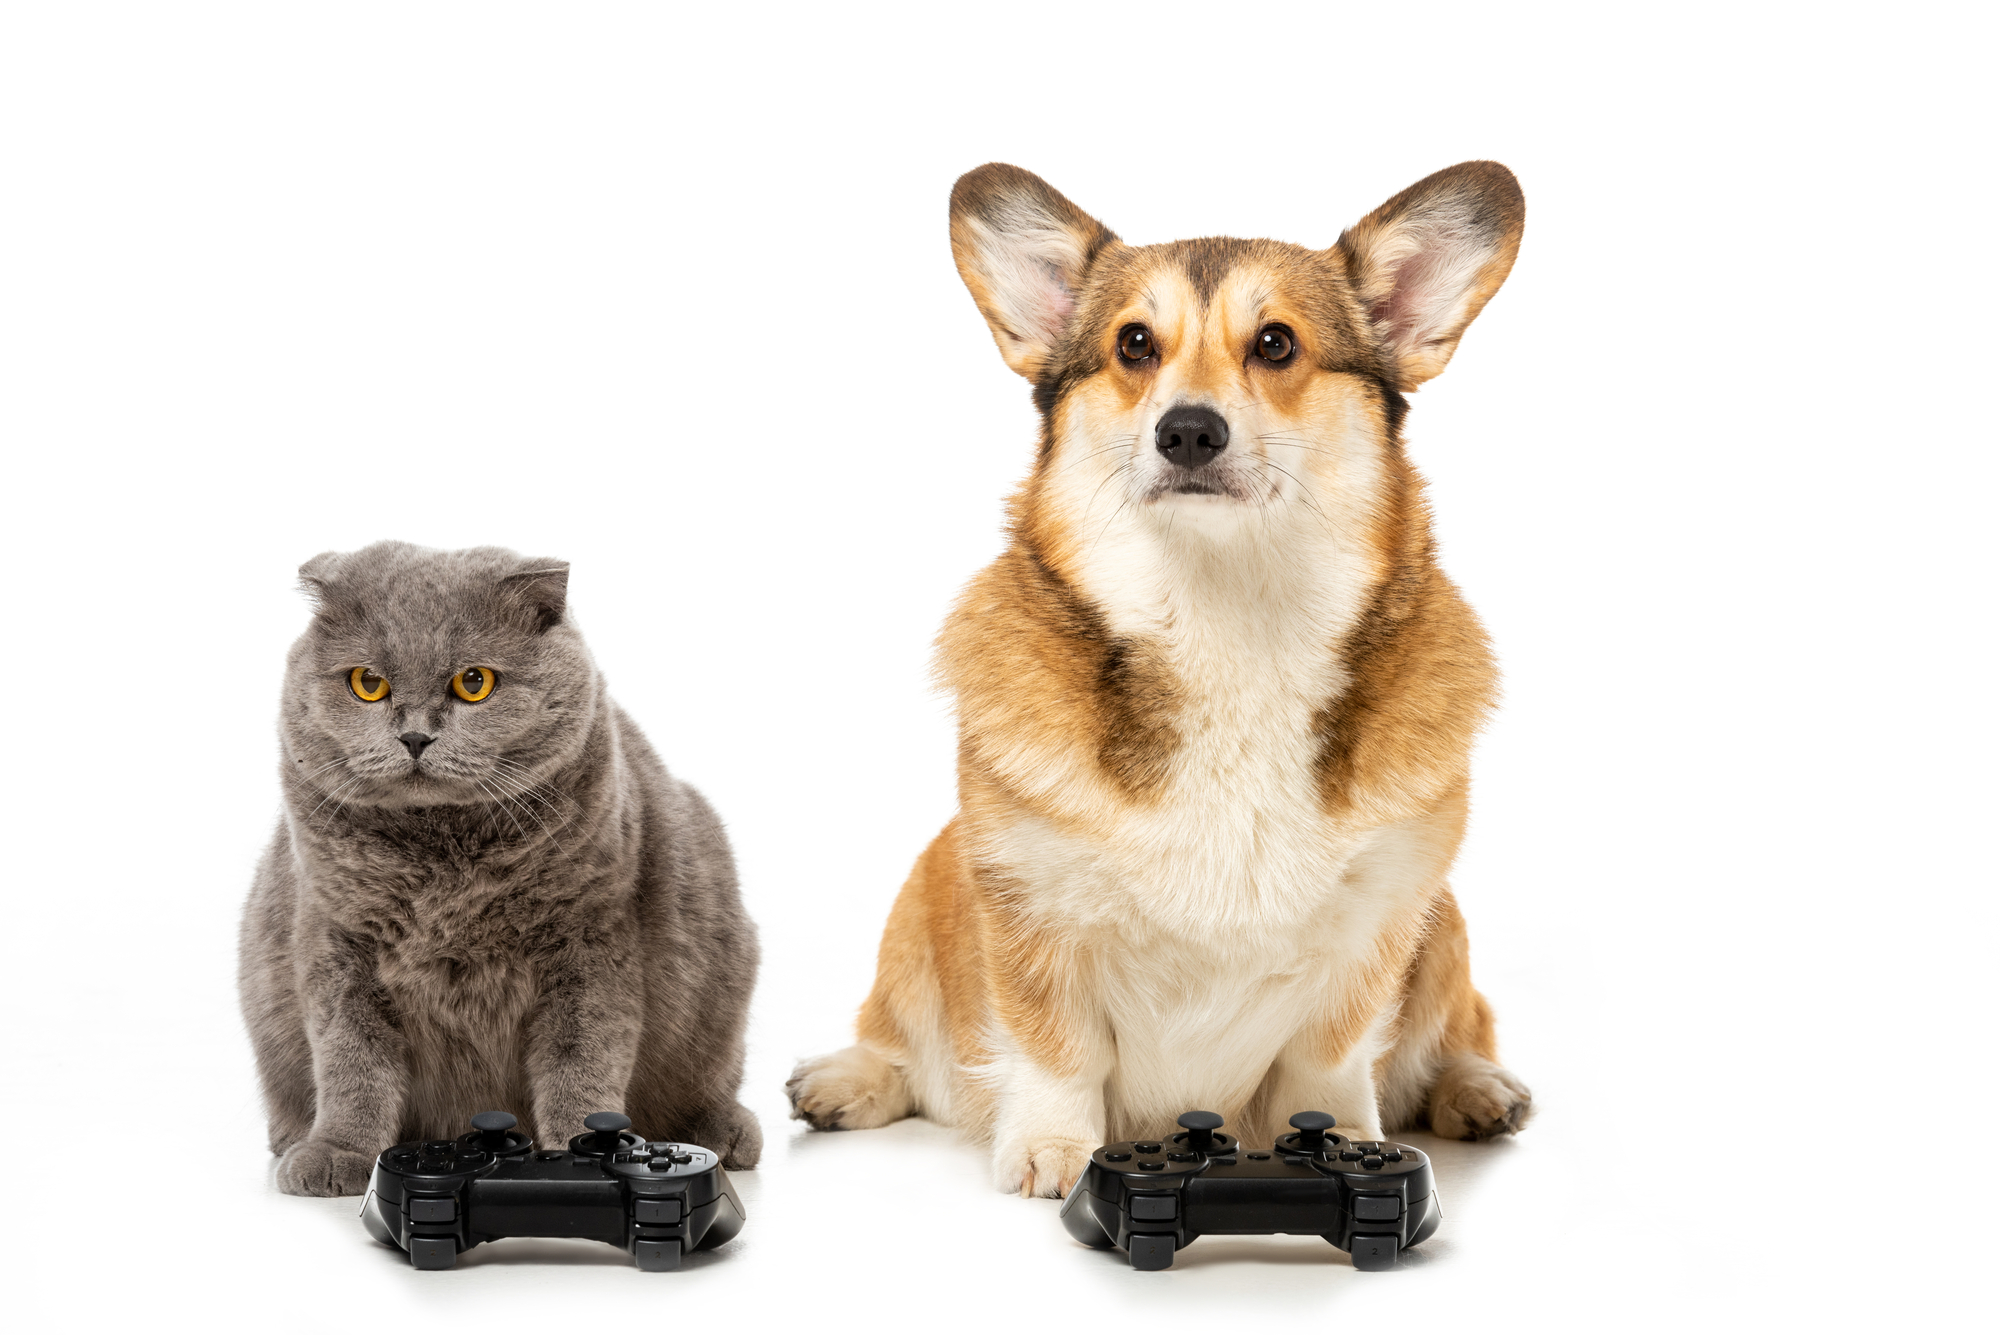 Dog and Cat playing Video Game